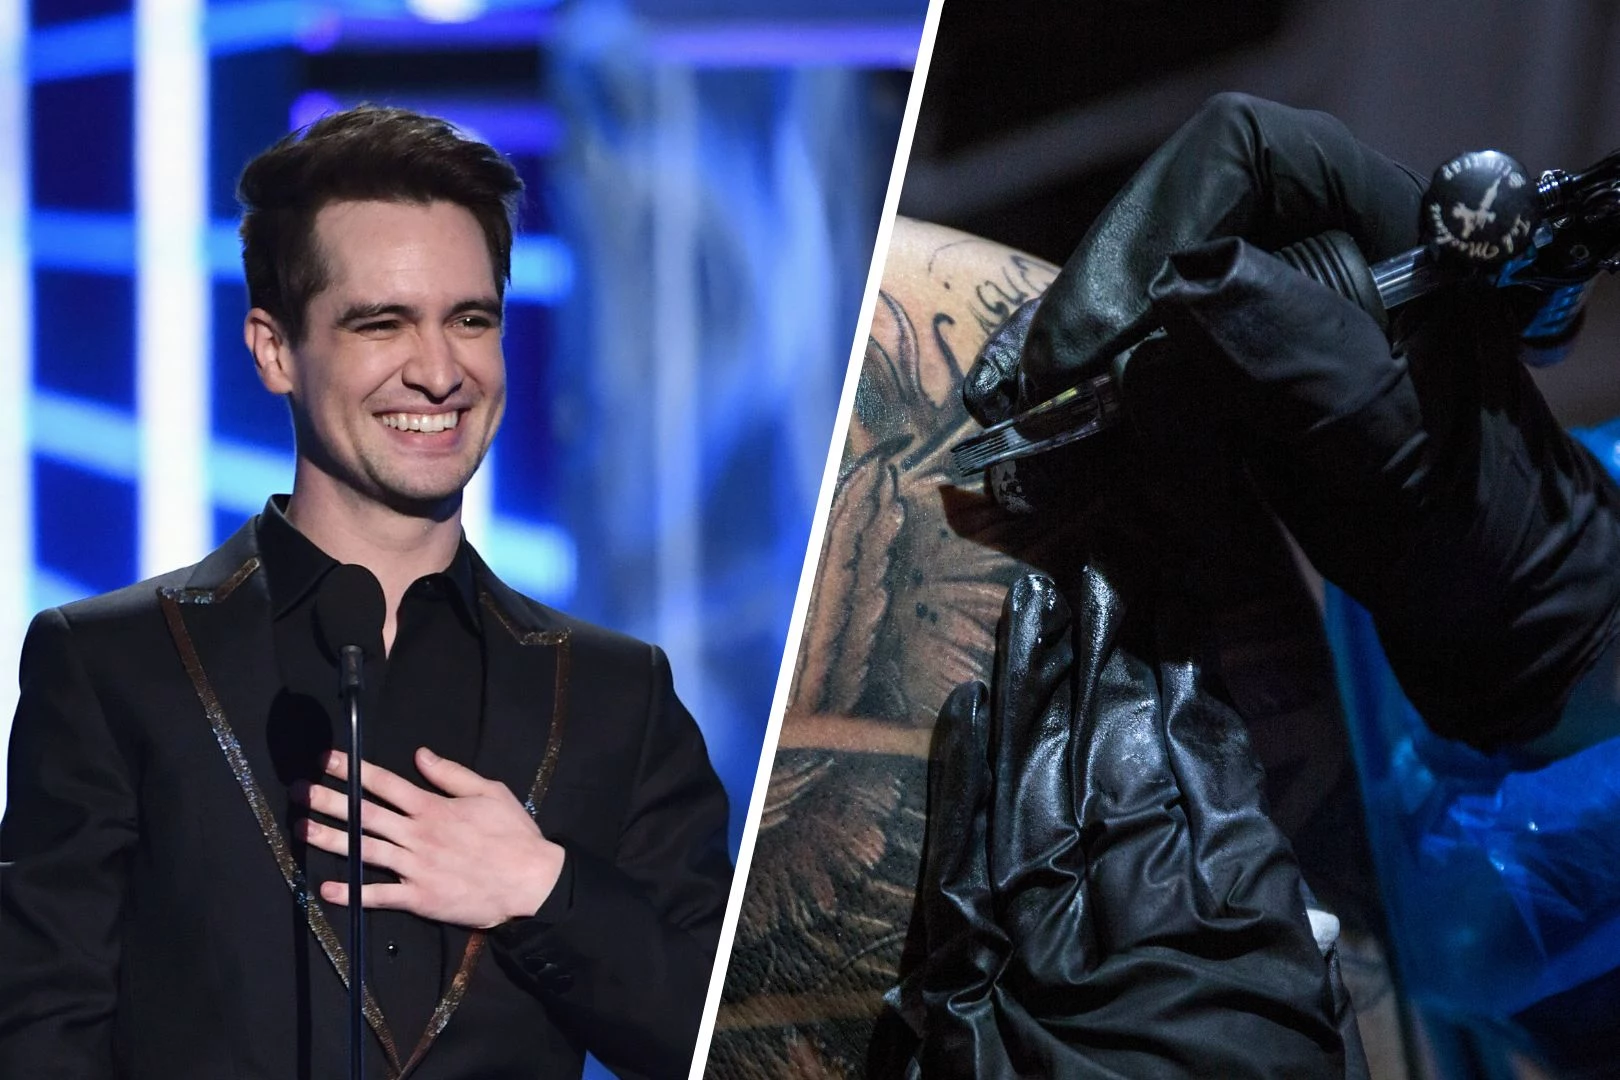 11 incredible Panic At The Disco tattoos you really should see